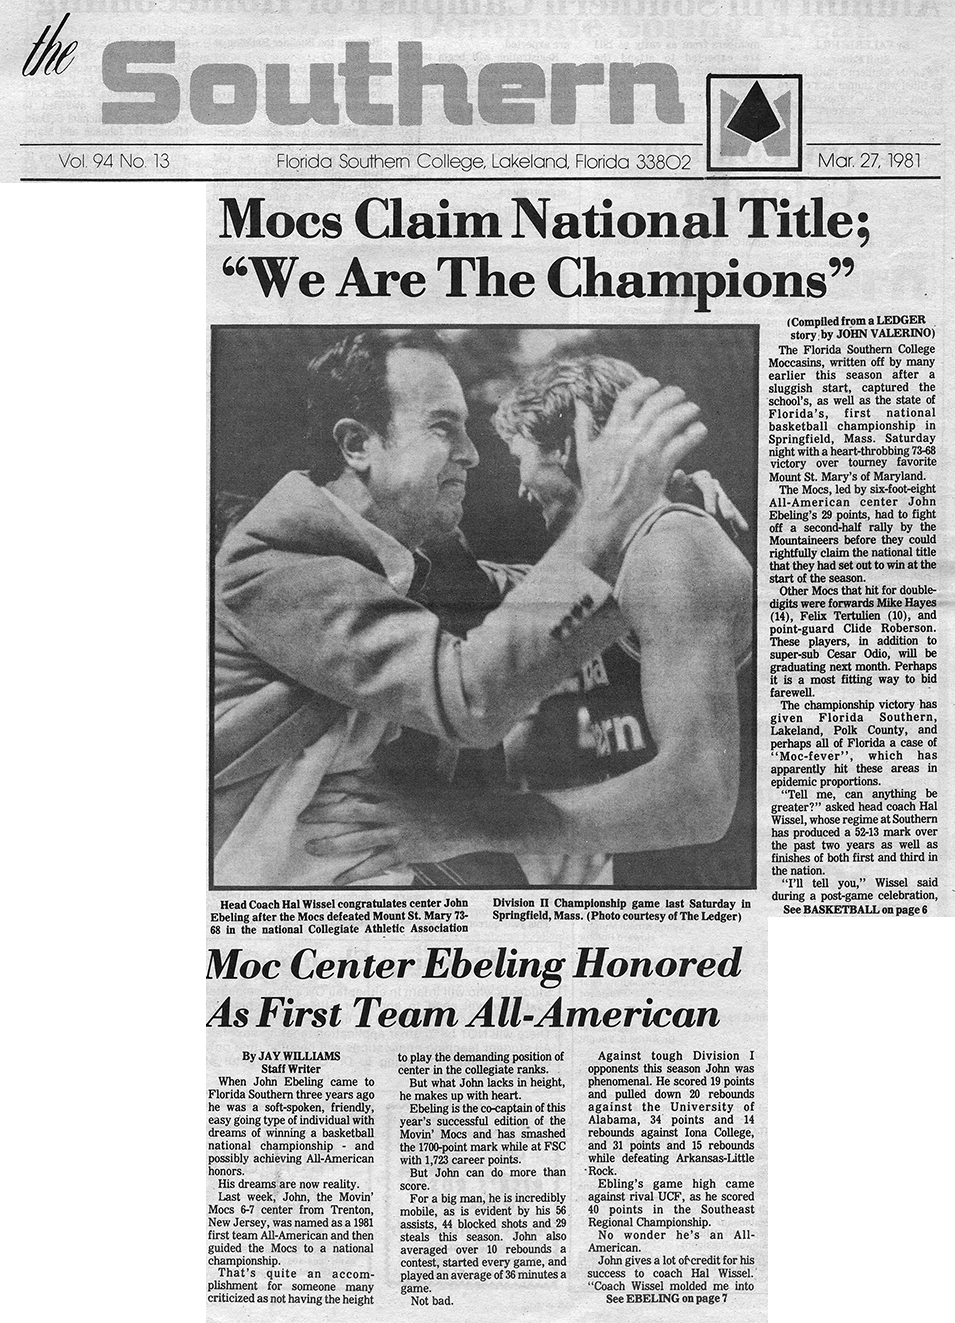 The Southern Vol. 94 No. 13 Florida Southern College, Lakeland, Florida 33802 Mar. 27, 1981 Mocs Claim National Title; “We Are The Champions” (Compiled from a LEDGER story by John Valerino)  The Florida Southern College Moccasins, written off by many earlier this season after a sluggish start, captured the school’s, as well as the state of Florida’s, first national basketball championship in Springfield, Mass. Saturday night with a heart-throbbing 73-68 victory over tourney favorite Mount St. Mary’s of Maryland.  The Mocs, led by six-foot-eight All-American center John Ebeling’s 29 points, had to fight off a second-half rally by the Mountaineers before they could rightfully claim the national title that they had set out to win at the start of the season.  Other Mocs that hit for double-digits were forwards Mike Hayes (14), Felix Tertulien (10), and point-guard Clide Roberson. These players, in addition to super-sub Cesar Odio, will be graduating next month. Perhaps it is a most fitting way to bid farewell.  The championship victory has given Florida Southern, Lakeland, Polk County, and perhaps all of Florida a case of “Moc-fever”, which has apparently hit these areas in epidemic proportions.  “Tell me, can anything be greater?” asked head coach Hal Wissel, whose regime at Southern has produced a 52-13 mark over the past two years as well as finished of both first and third in the nation.  “I’ll tell you,” Wissel said during a post-game celebration,  See BASKETBALL on page 6  Head Coach Hal Wissel congratulates center John Ebeling after the Mocs defeated Mount St. Mary 73-68 in the national Collegiate Athletic Association Division II Championship game last Saturday in Springfield, Mass. (Photo courtesy of The Ledger)  Moc Center Ebeling Honored as First Team All-American By JAY WILLIAMS Staff Writer  When John Ebeling came to Florida Southern three years ago he was a soft-spoken, friendly, easy going type of individual with dreams of winning a basketball national championship – and possibly achieving All-American honors.  His dreams are now reality.  Last week, John, the Movin’ Mocs 6-7 center from Trenton, New Jersey, was named as a 1981 first team All-American and then guided the Mocs to a national championship.   That’s quite an accomplishment for someone many criticized for not having the height to play the demanding position of center in the collegiate ranks.  But what John lacks in height, he makes up with heart.  Ebeling is the co-captain of this year’s successful edition of the Movin’ Mocs and has smashed the 1700-point mark while at FSC with 1,723 career points.  But John can do more than score.  For a big man, he is incredibly mobile, as is evident by his 56 assists, 44 blocked shots and 29 steals this season. John also averaged over 10 rebounds a contest, started every game, and played an average of 36 minutes a game.  Not bad.  Against tough Division I opponents this season John was phenomenal. He scored 19 points and pulled 20 rebounds against the University of Alabama, 34 points and 14 rebounds against Iona College, and 31 points and 15 rebounds while defeating Arkansas-Little Rock.  Ebling’s game high came against rivel UCF, as he scored 40 points in the Southeast Regional Championship.  No wonder he’s an All-American.  John gives a lot of credit for his success to coach Hal Wissel. “Coach Wissel molded me into  See EBELING on page 7